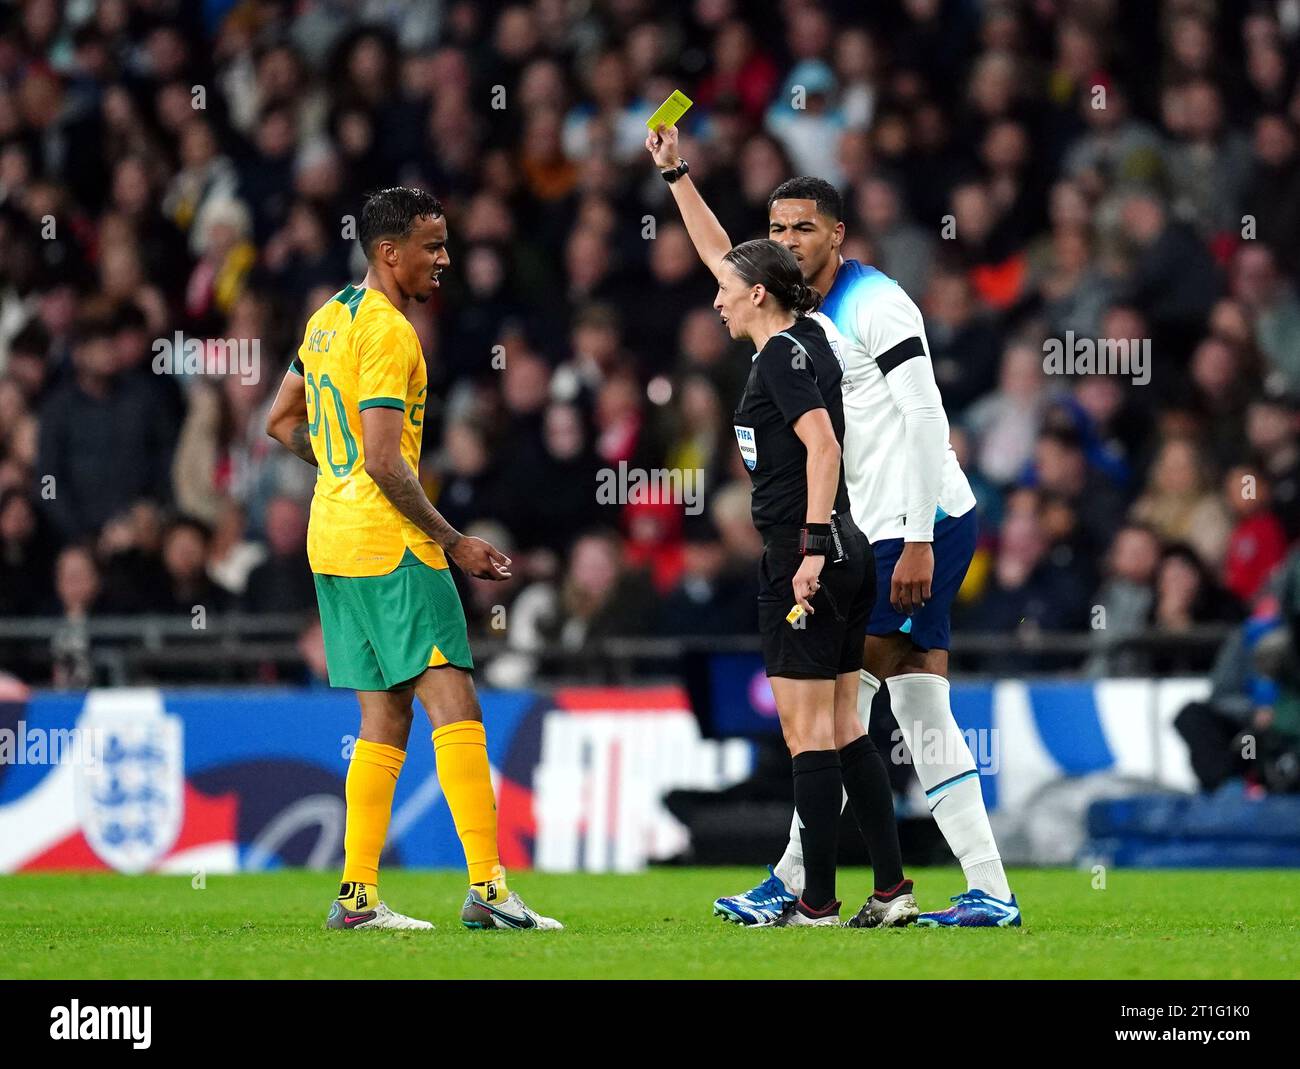 Referee Stephanie Frappart (centre) shows a yellow card to Australia's Keanu Baccus during the international friendly match at Wembley Stadium, London. Frappert is the first woman to officiate a men's international game at Wembley. Picture date: Friday October 13, 2023. Stock Photo